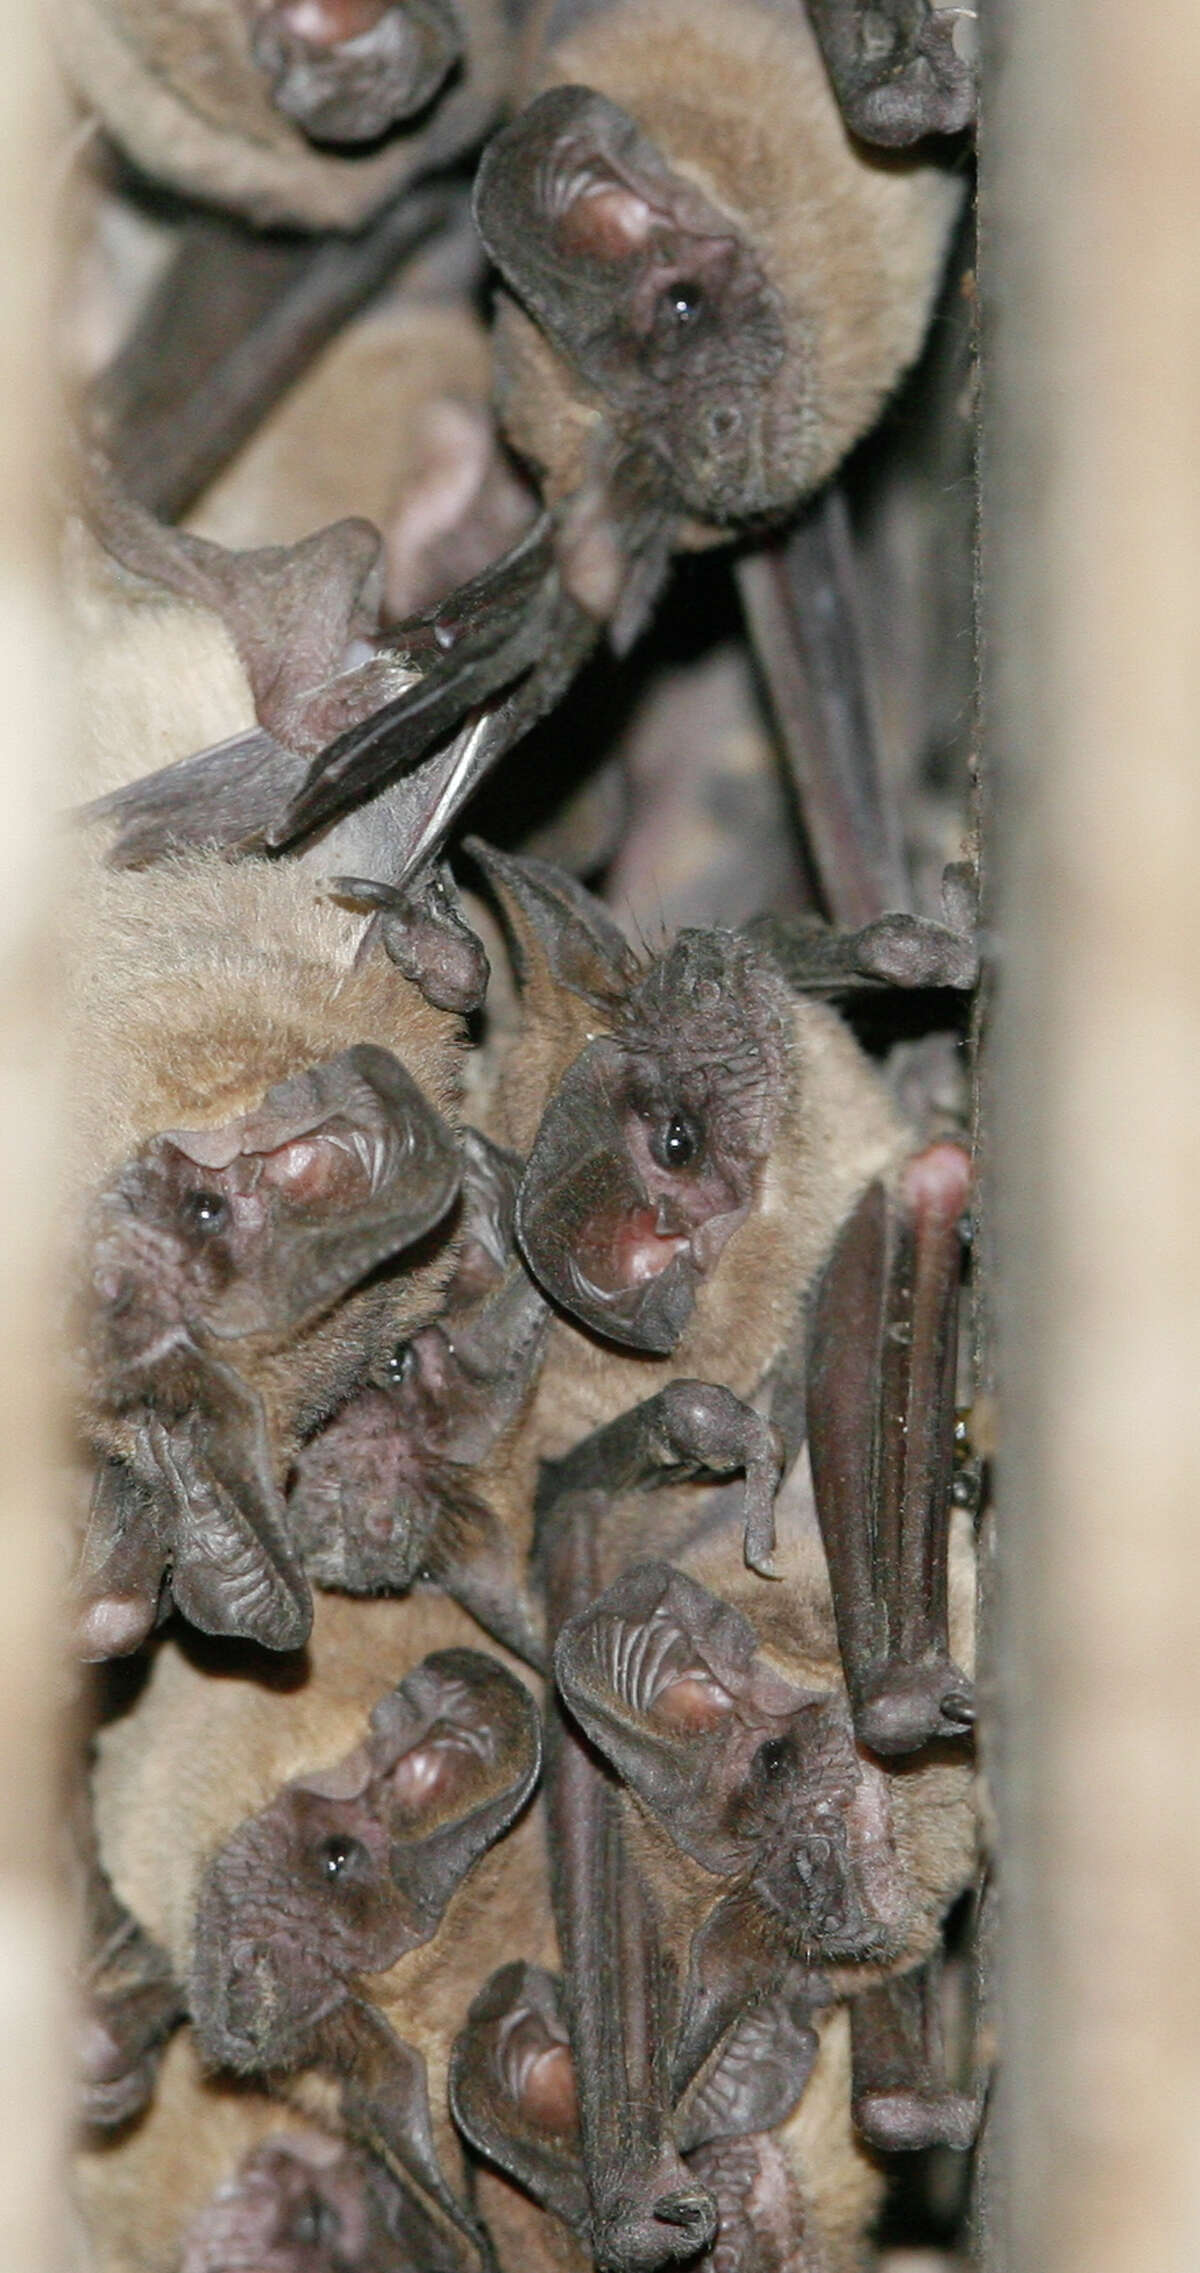 Before Harvey, hundreds of thorusands of Mexican free-tailed bats lived under the Waugh Drive bridge.